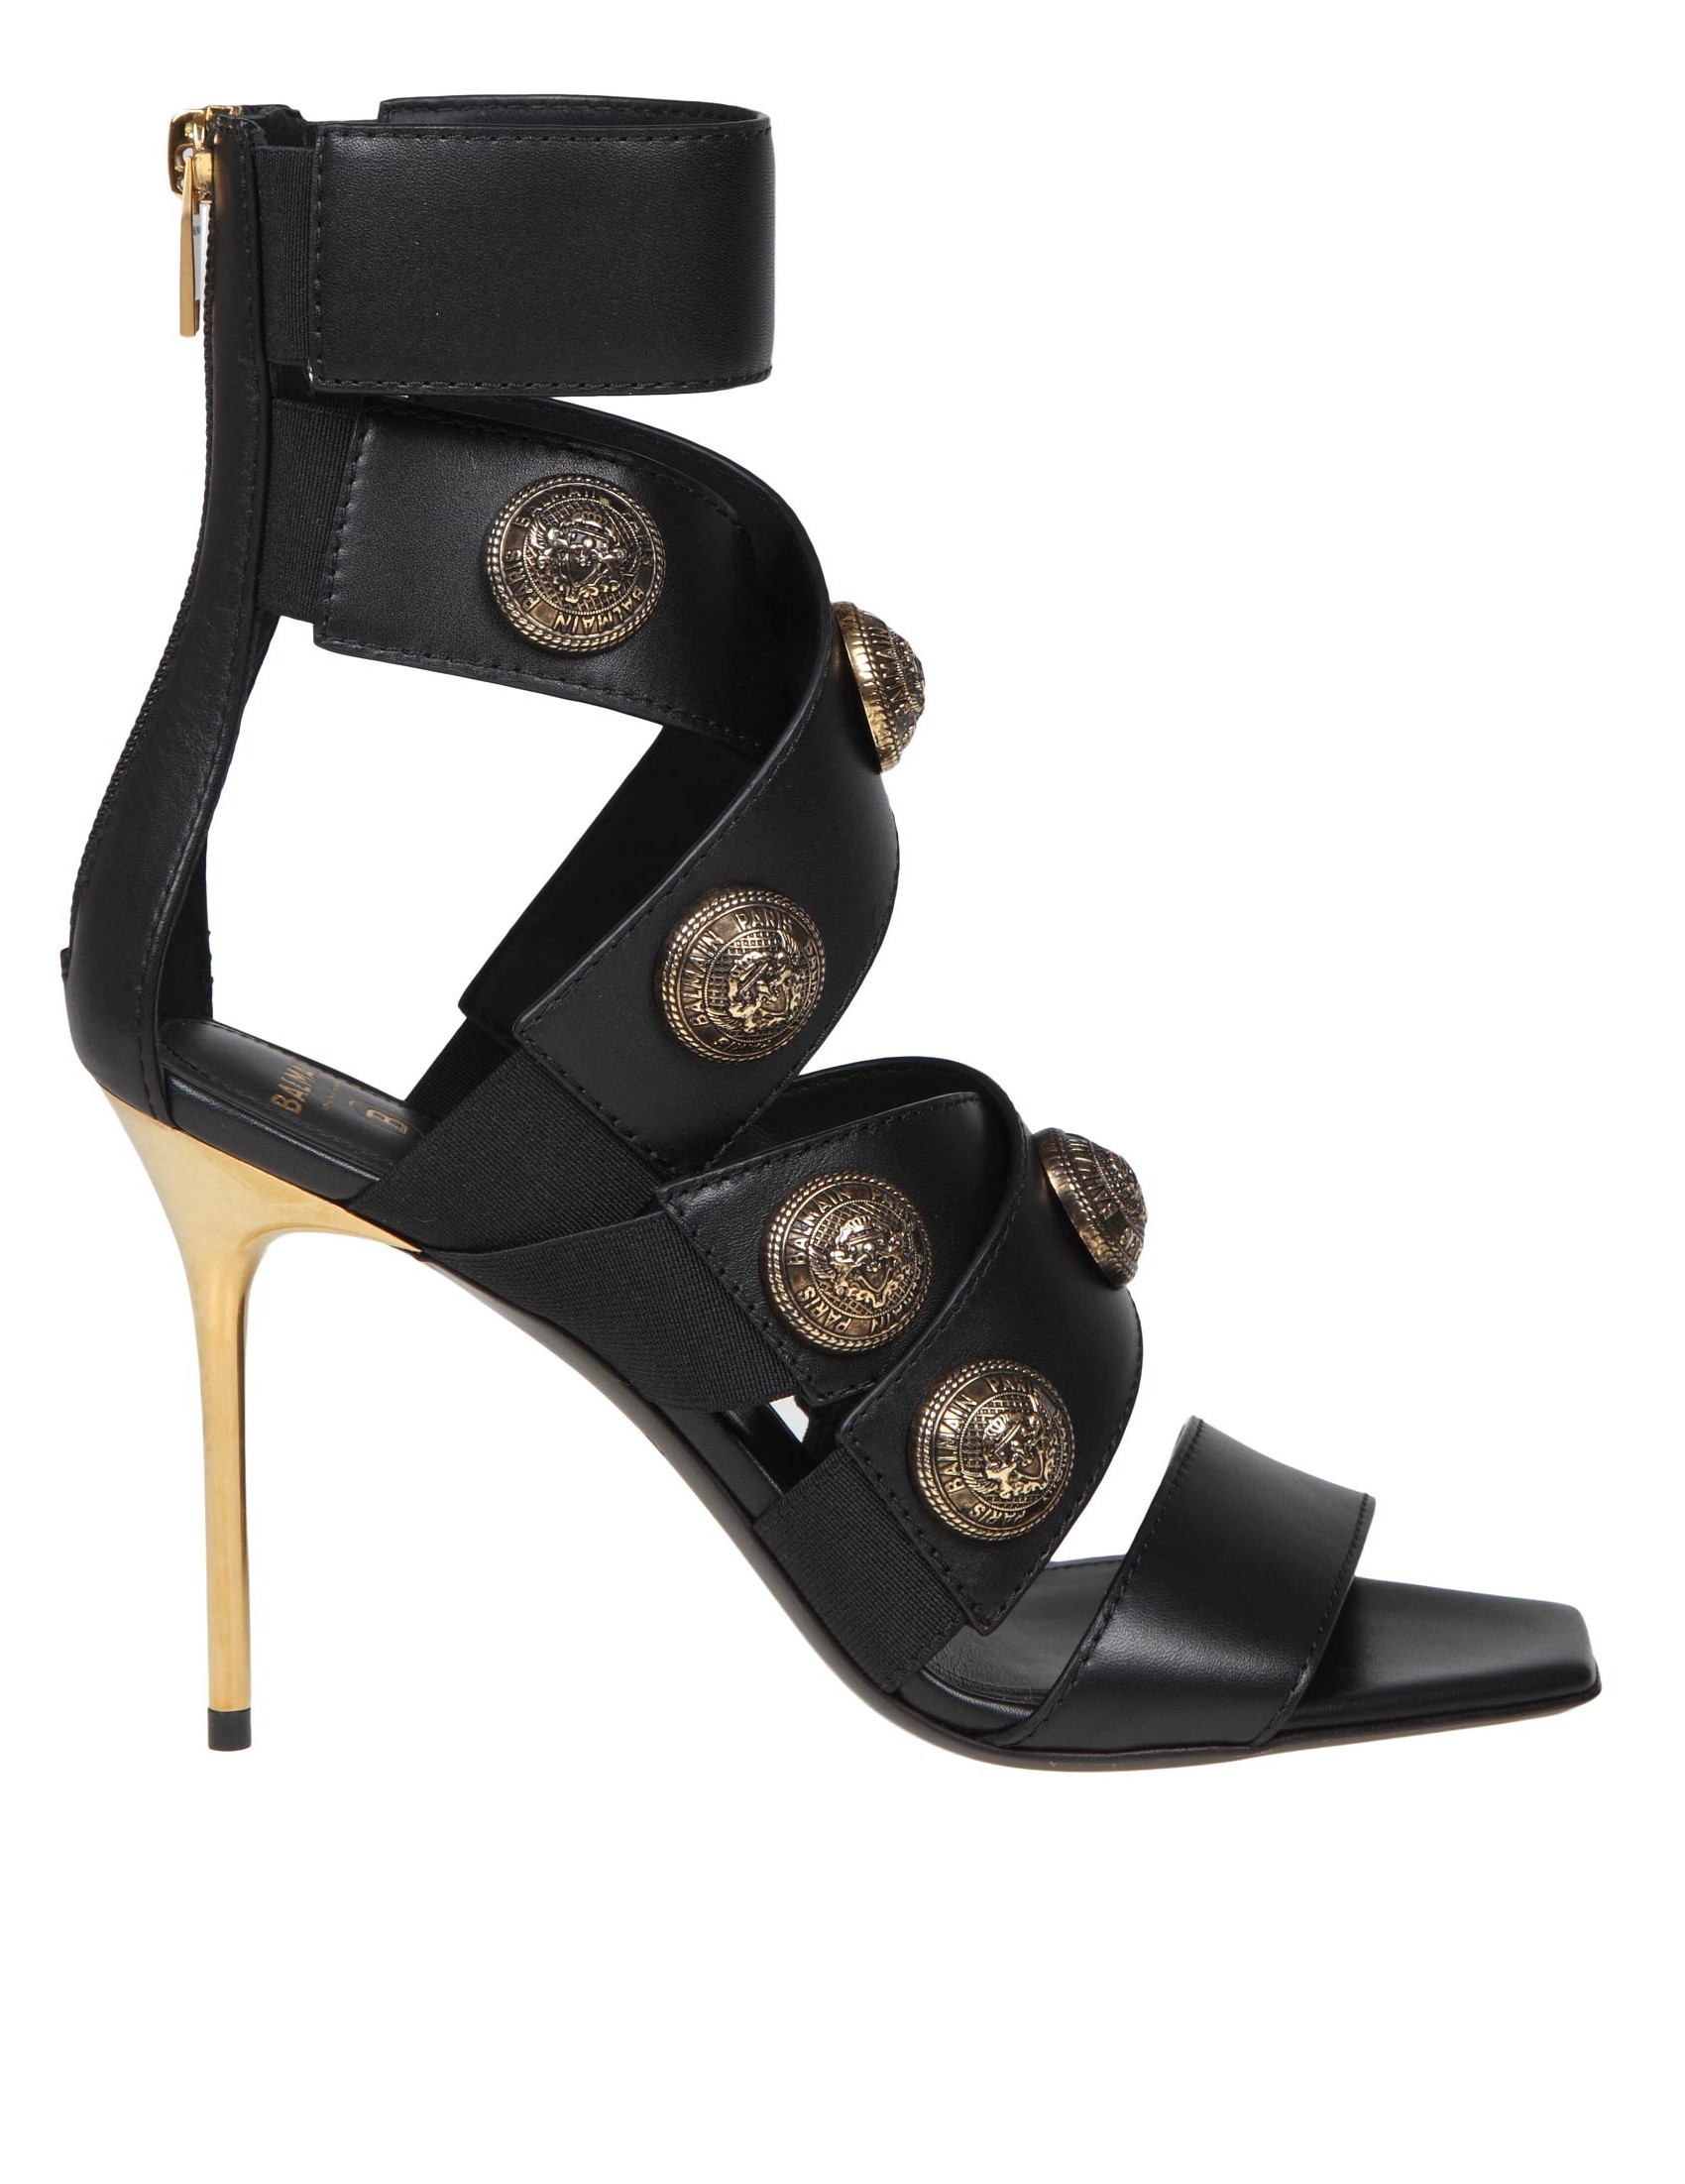 BALMAIN ALMA LEATHER SANDAL WITH APPLIED BUTTONS